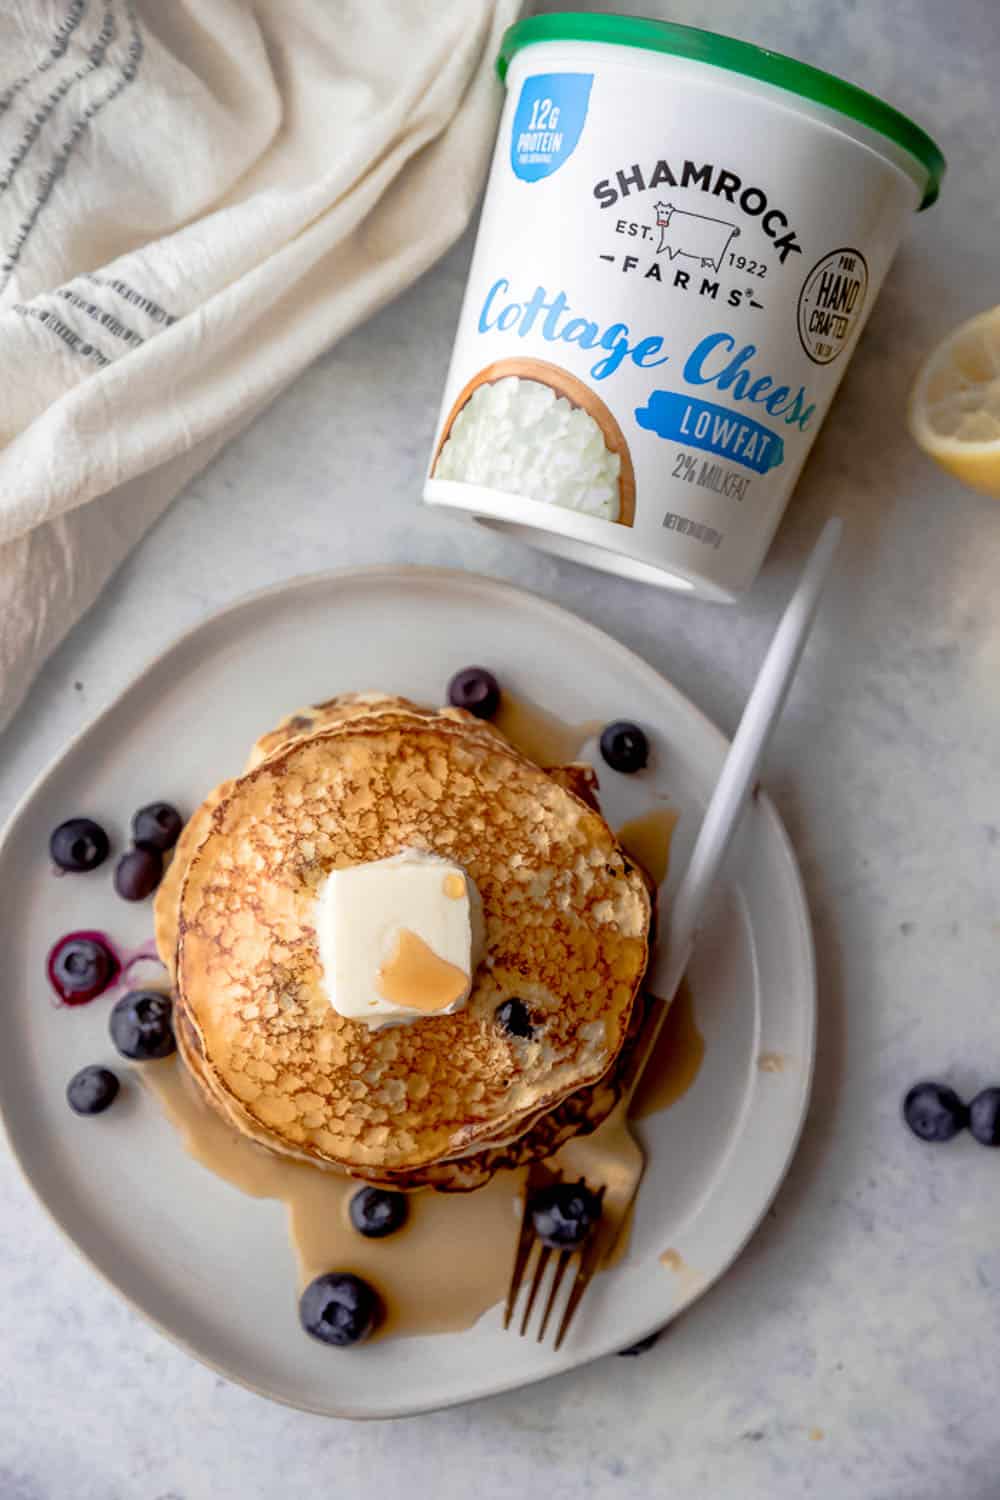 Lemon Blueberry Cottage Cheese Pancakes with Shamrock Farms Low Fat Cottage Cheese.